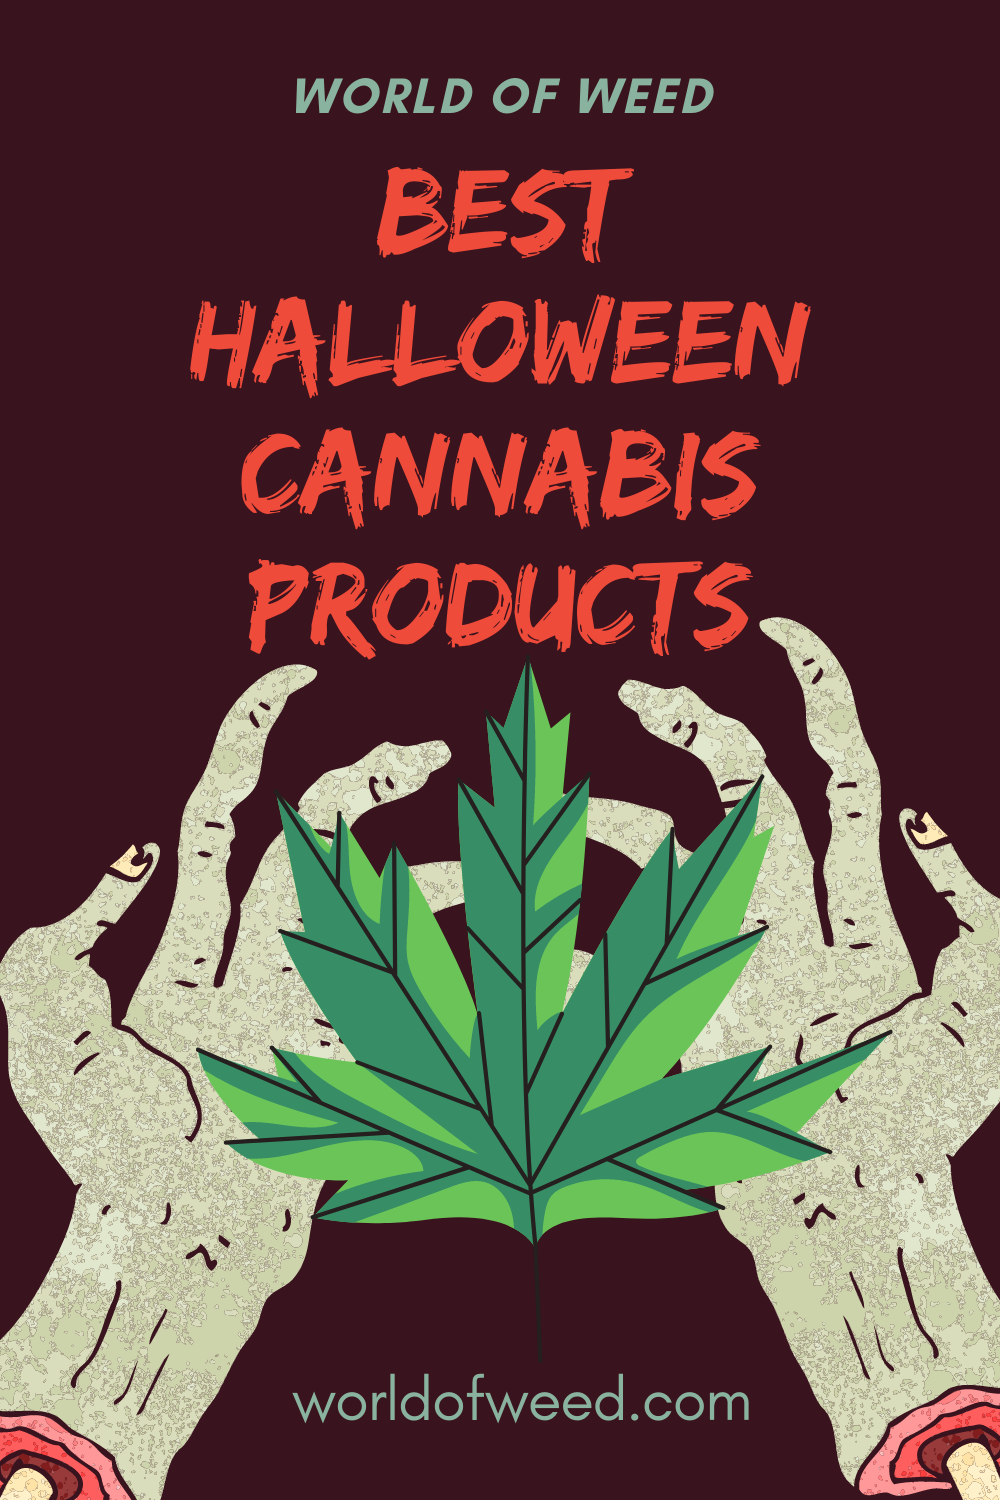 14 Best Halloween Cannabis Products